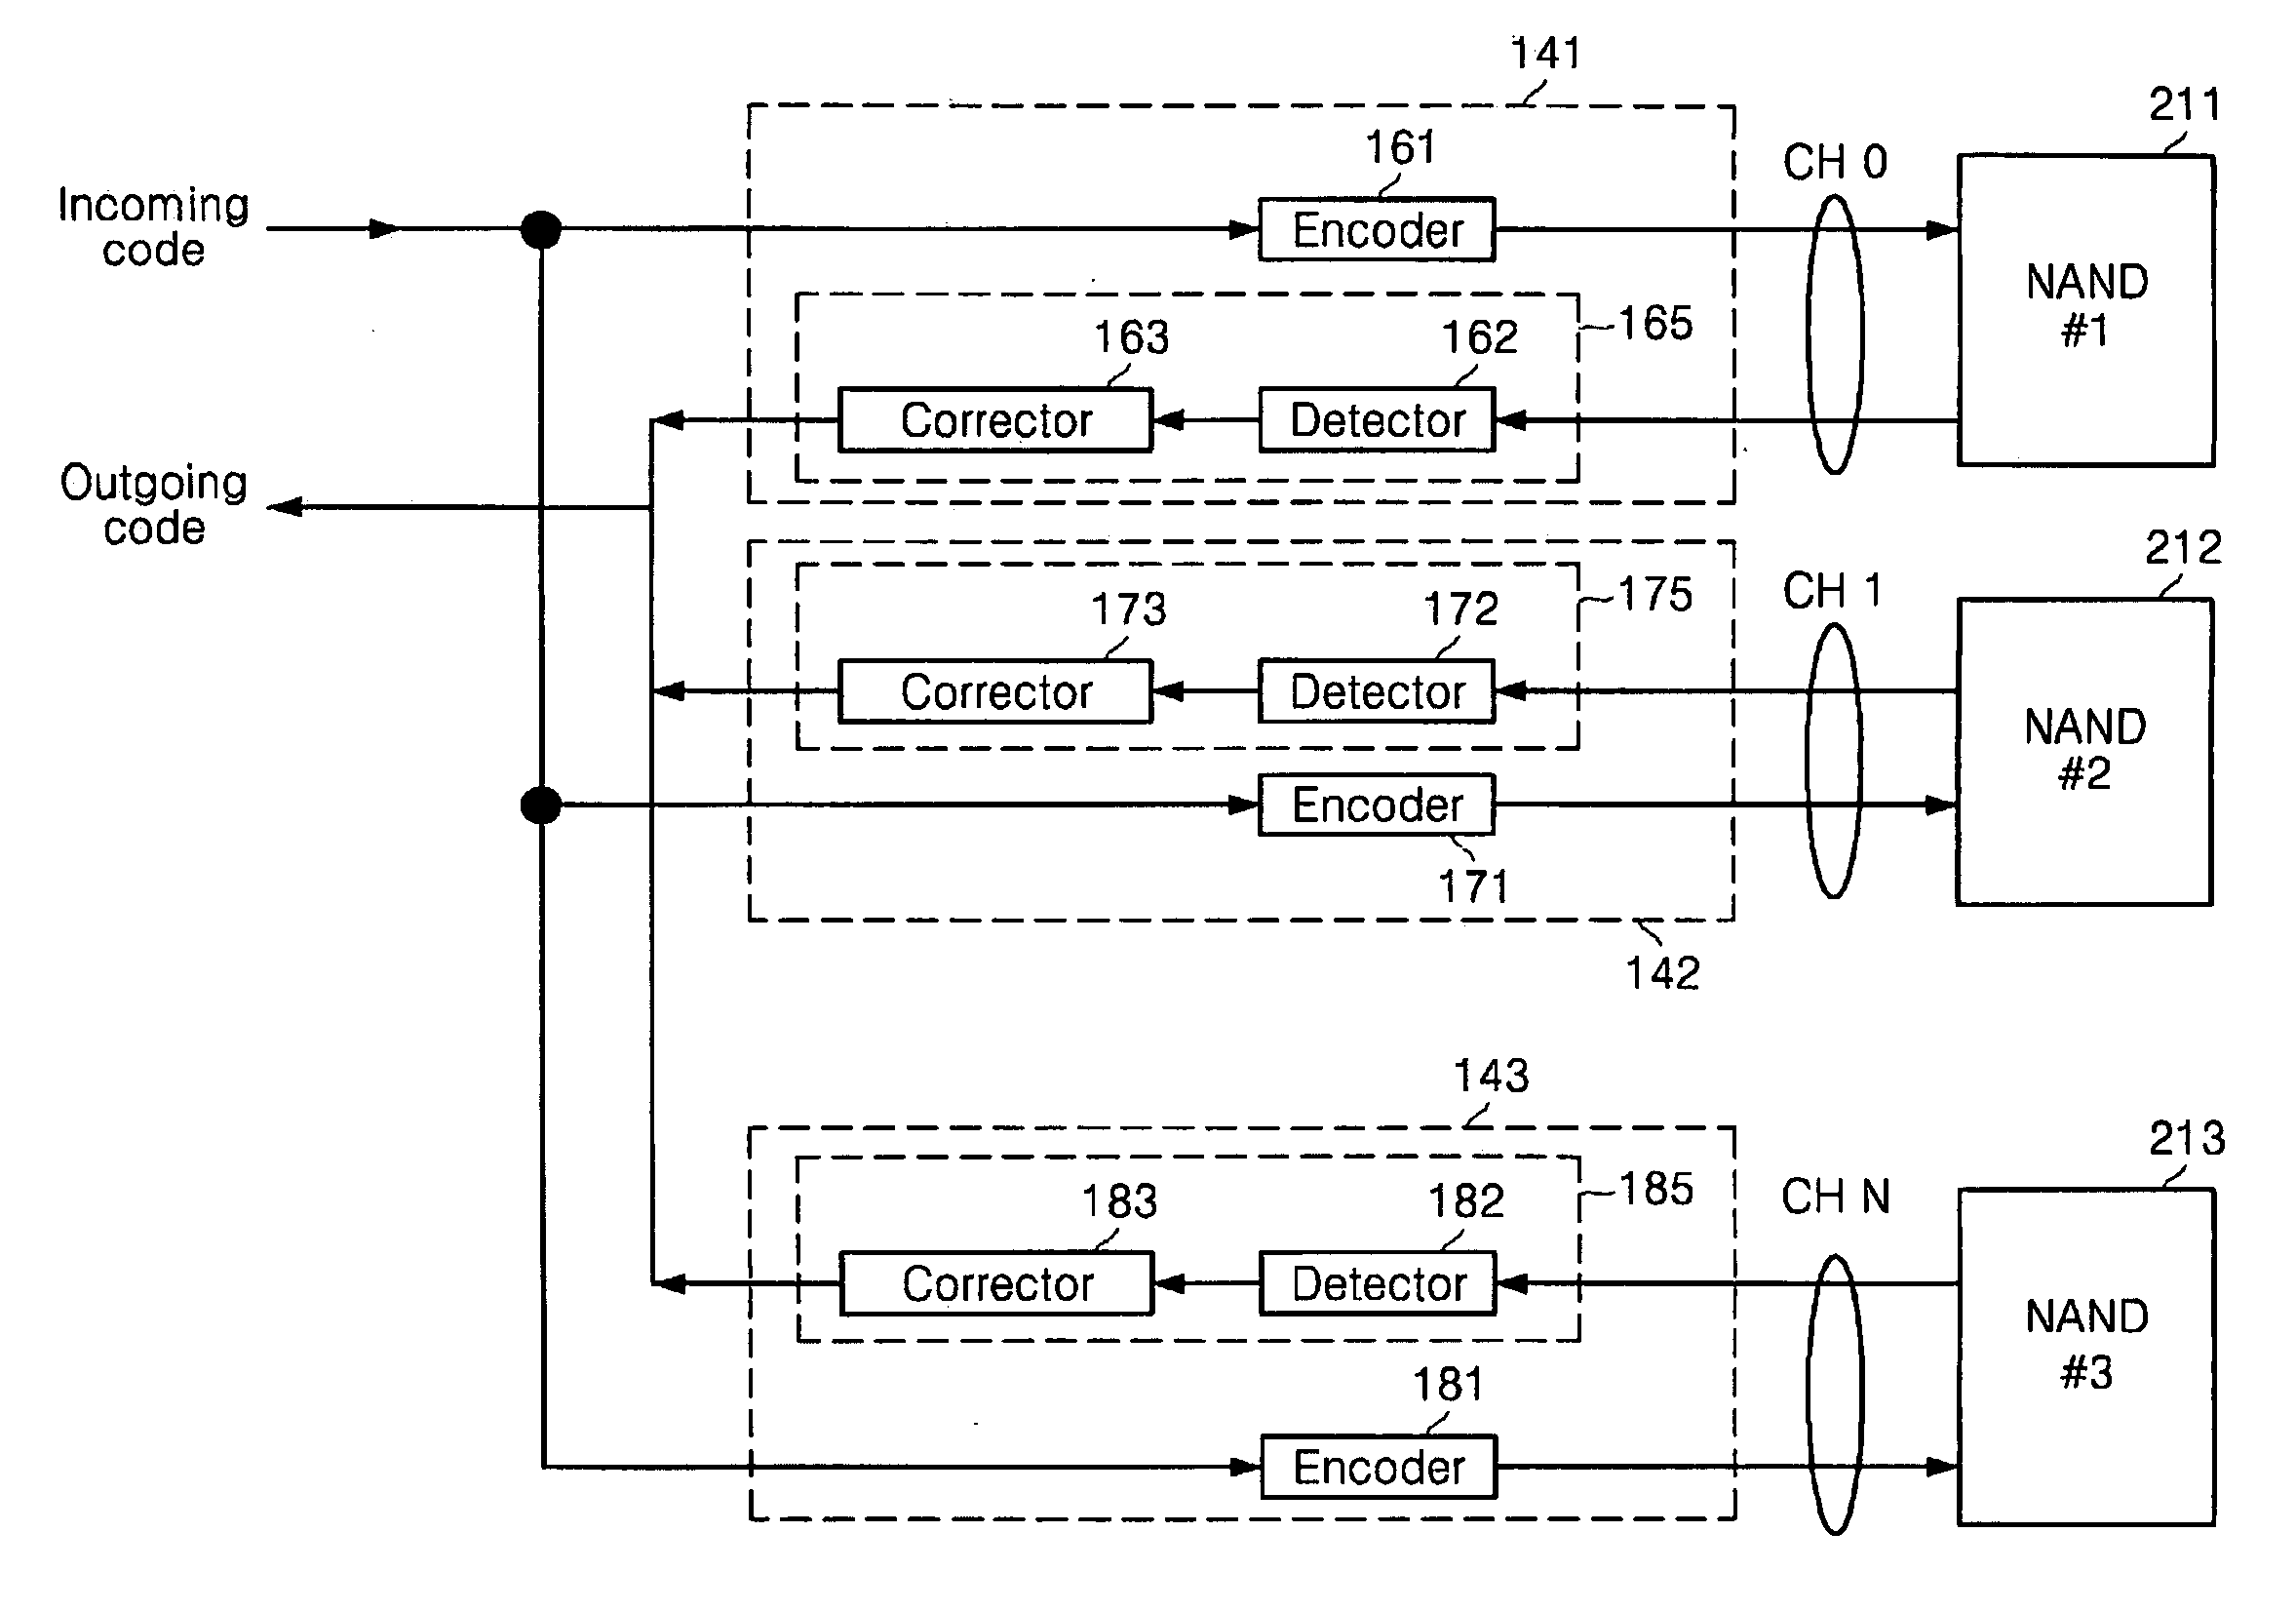 Multi-channel error correction coder architecture using embedded memory